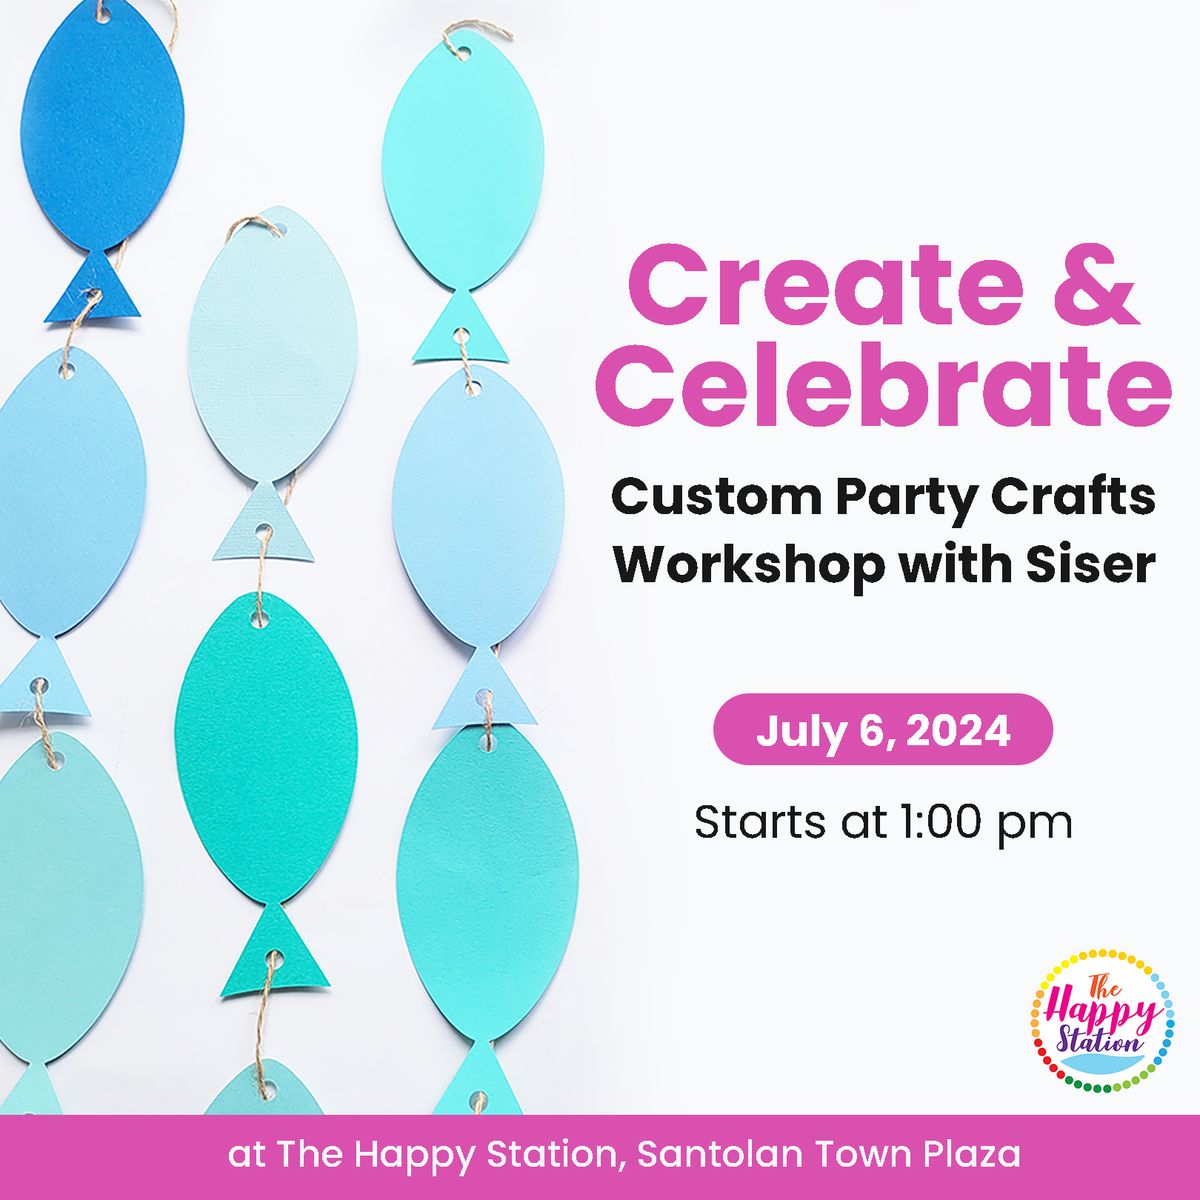 Create & Celebrate - A Custom Party Crafts Workshop with Siser